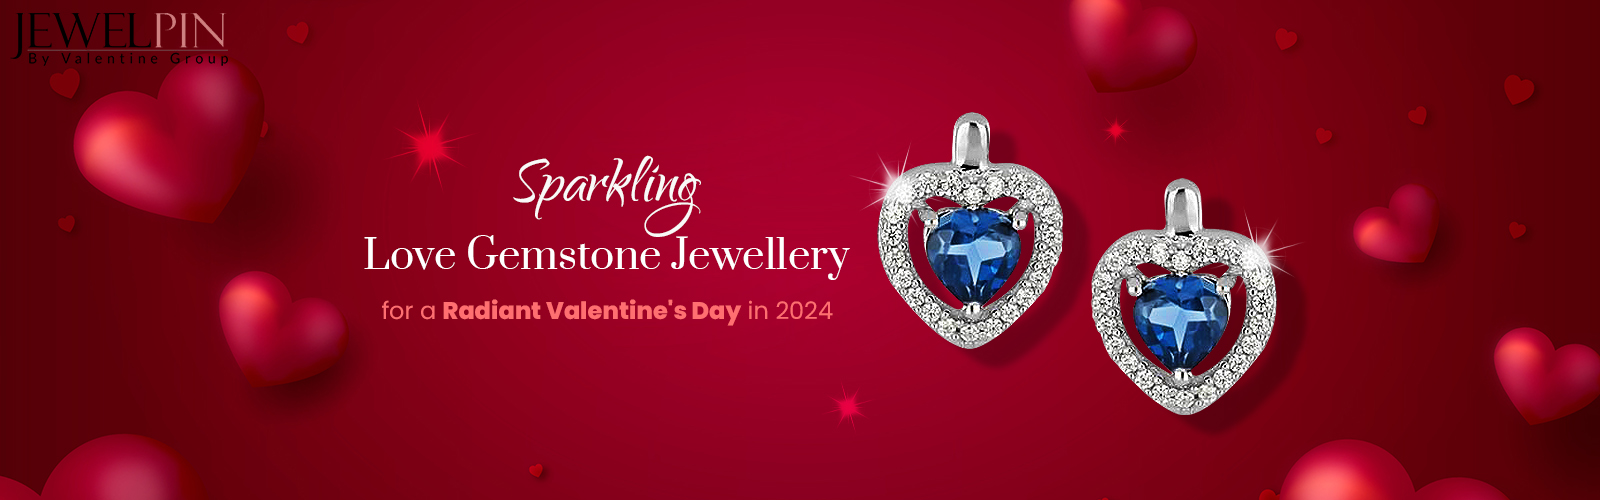 love heart shape gemstone jewellery for a radiant valentine's day in 2024